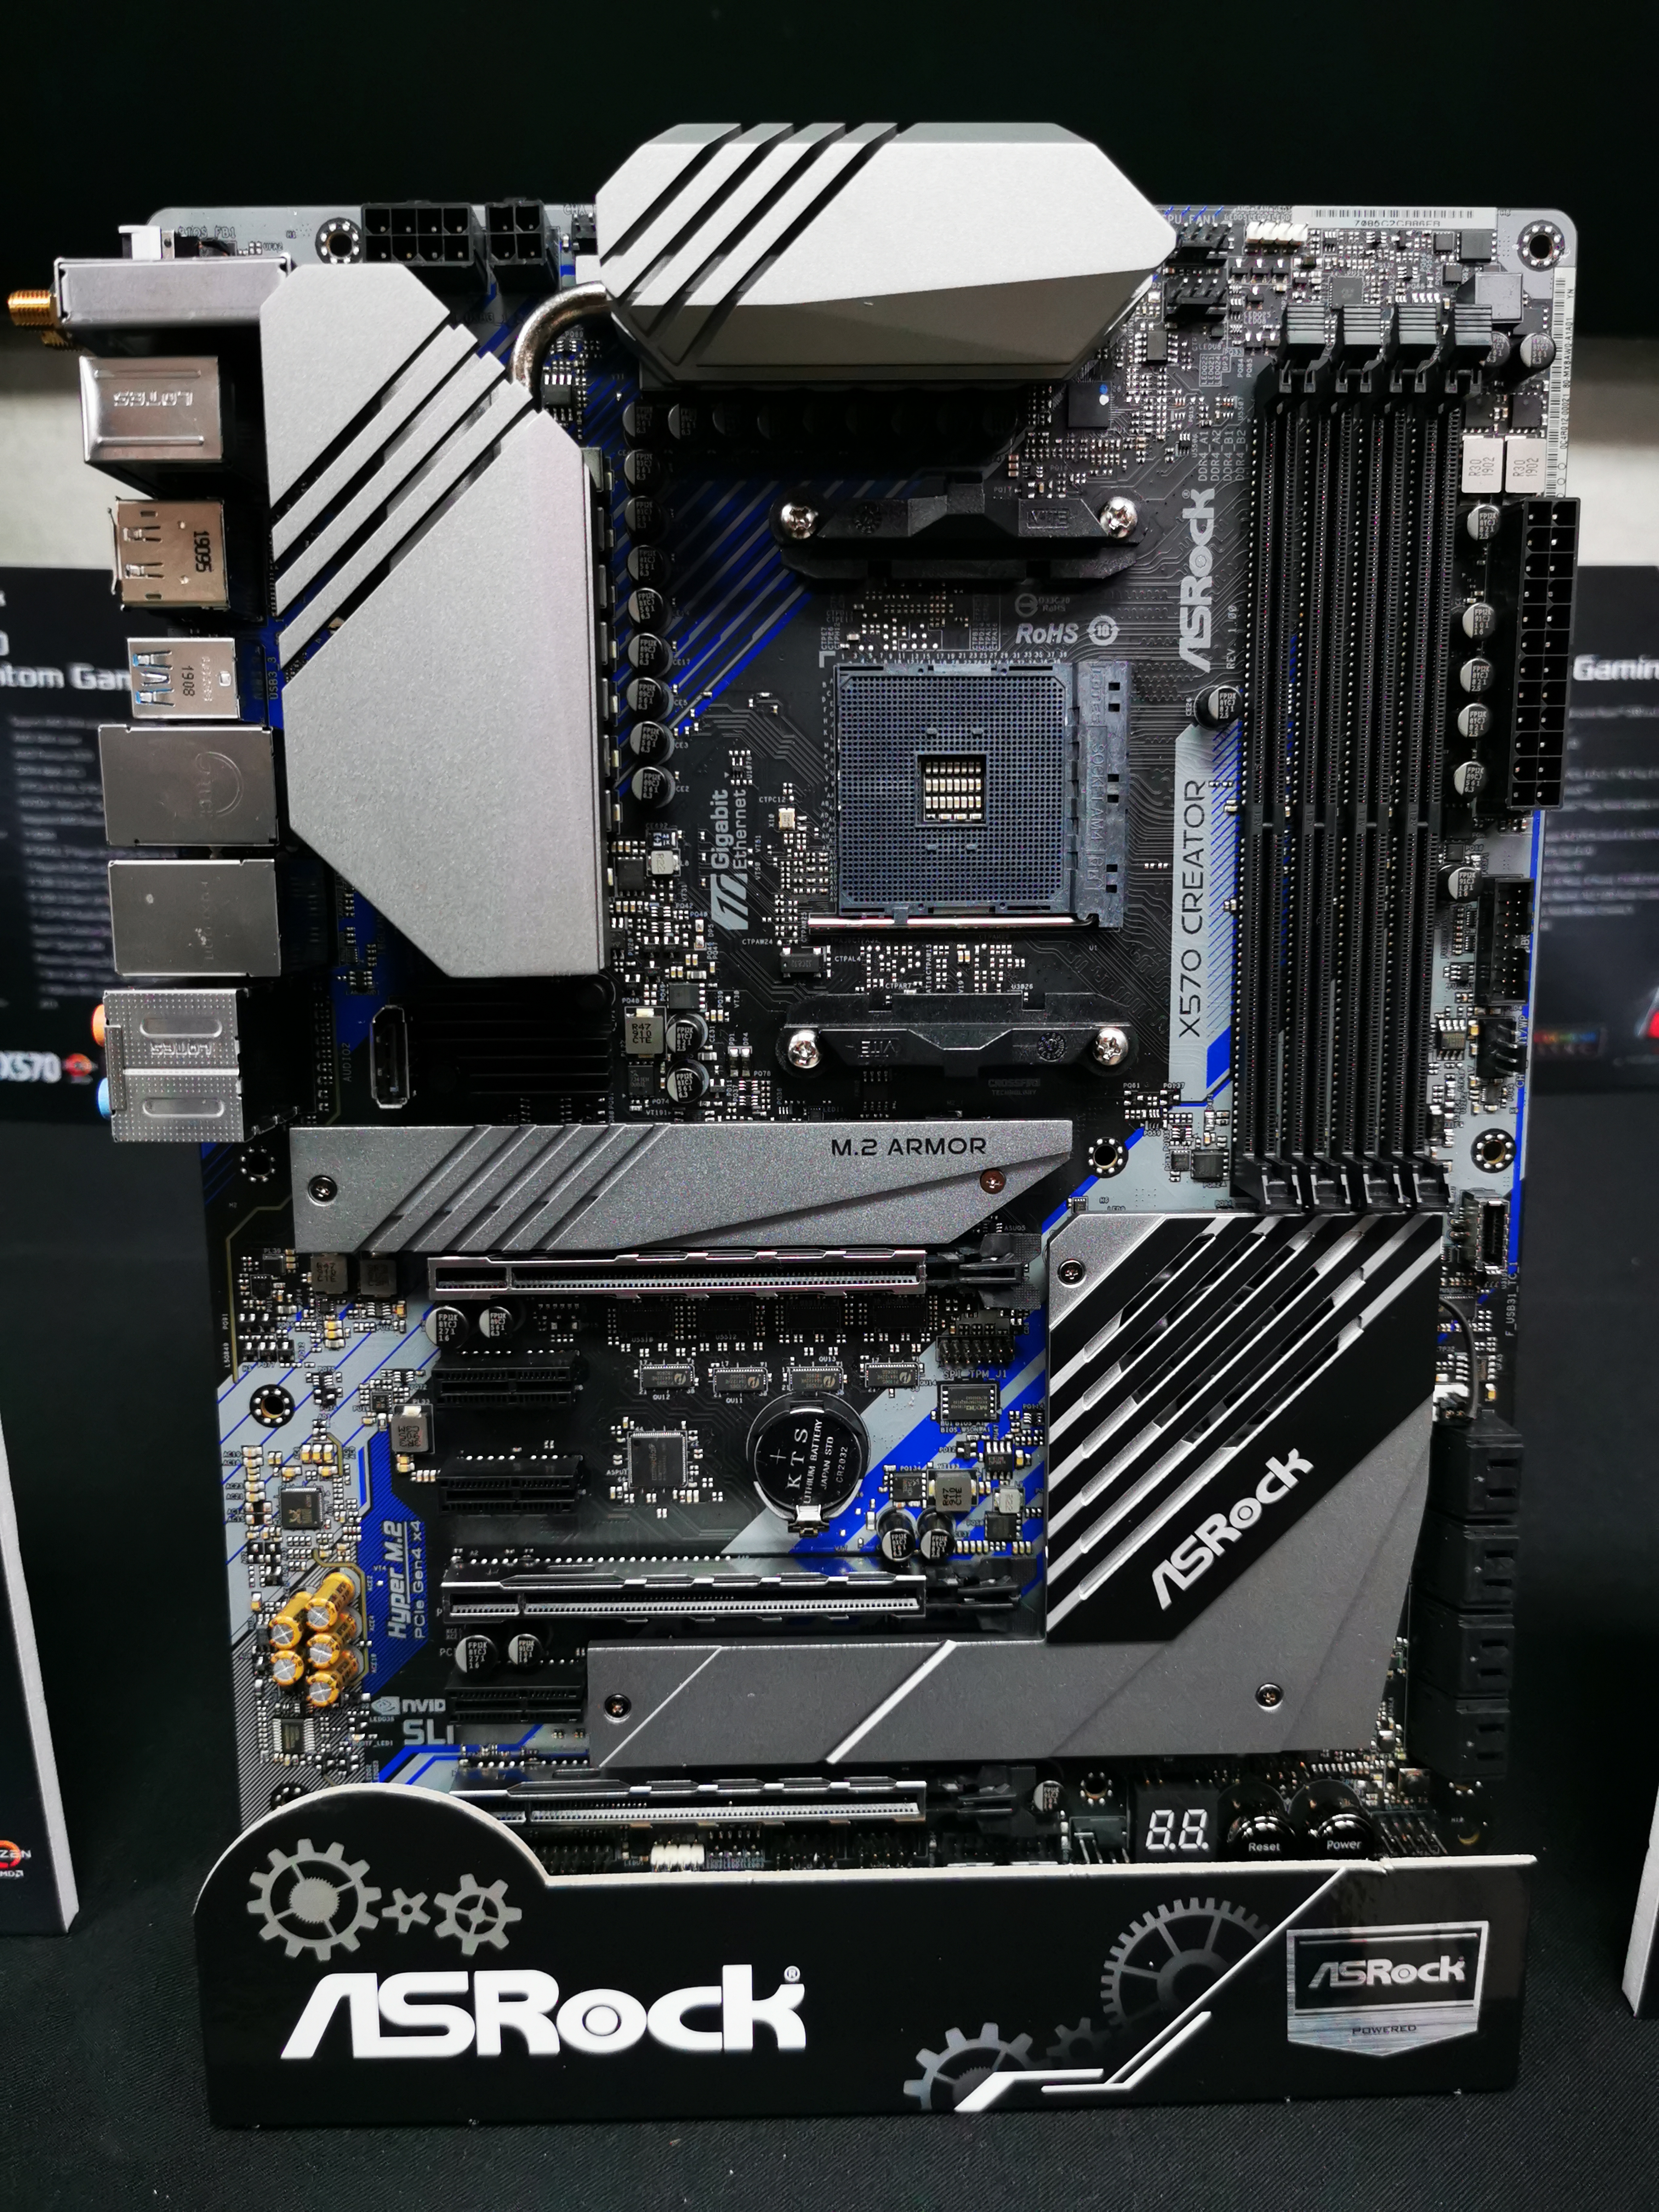 ASRock X570 Creator - The AMD X570 Motherboard Overview: Over 35+  Motherboards Analyzed